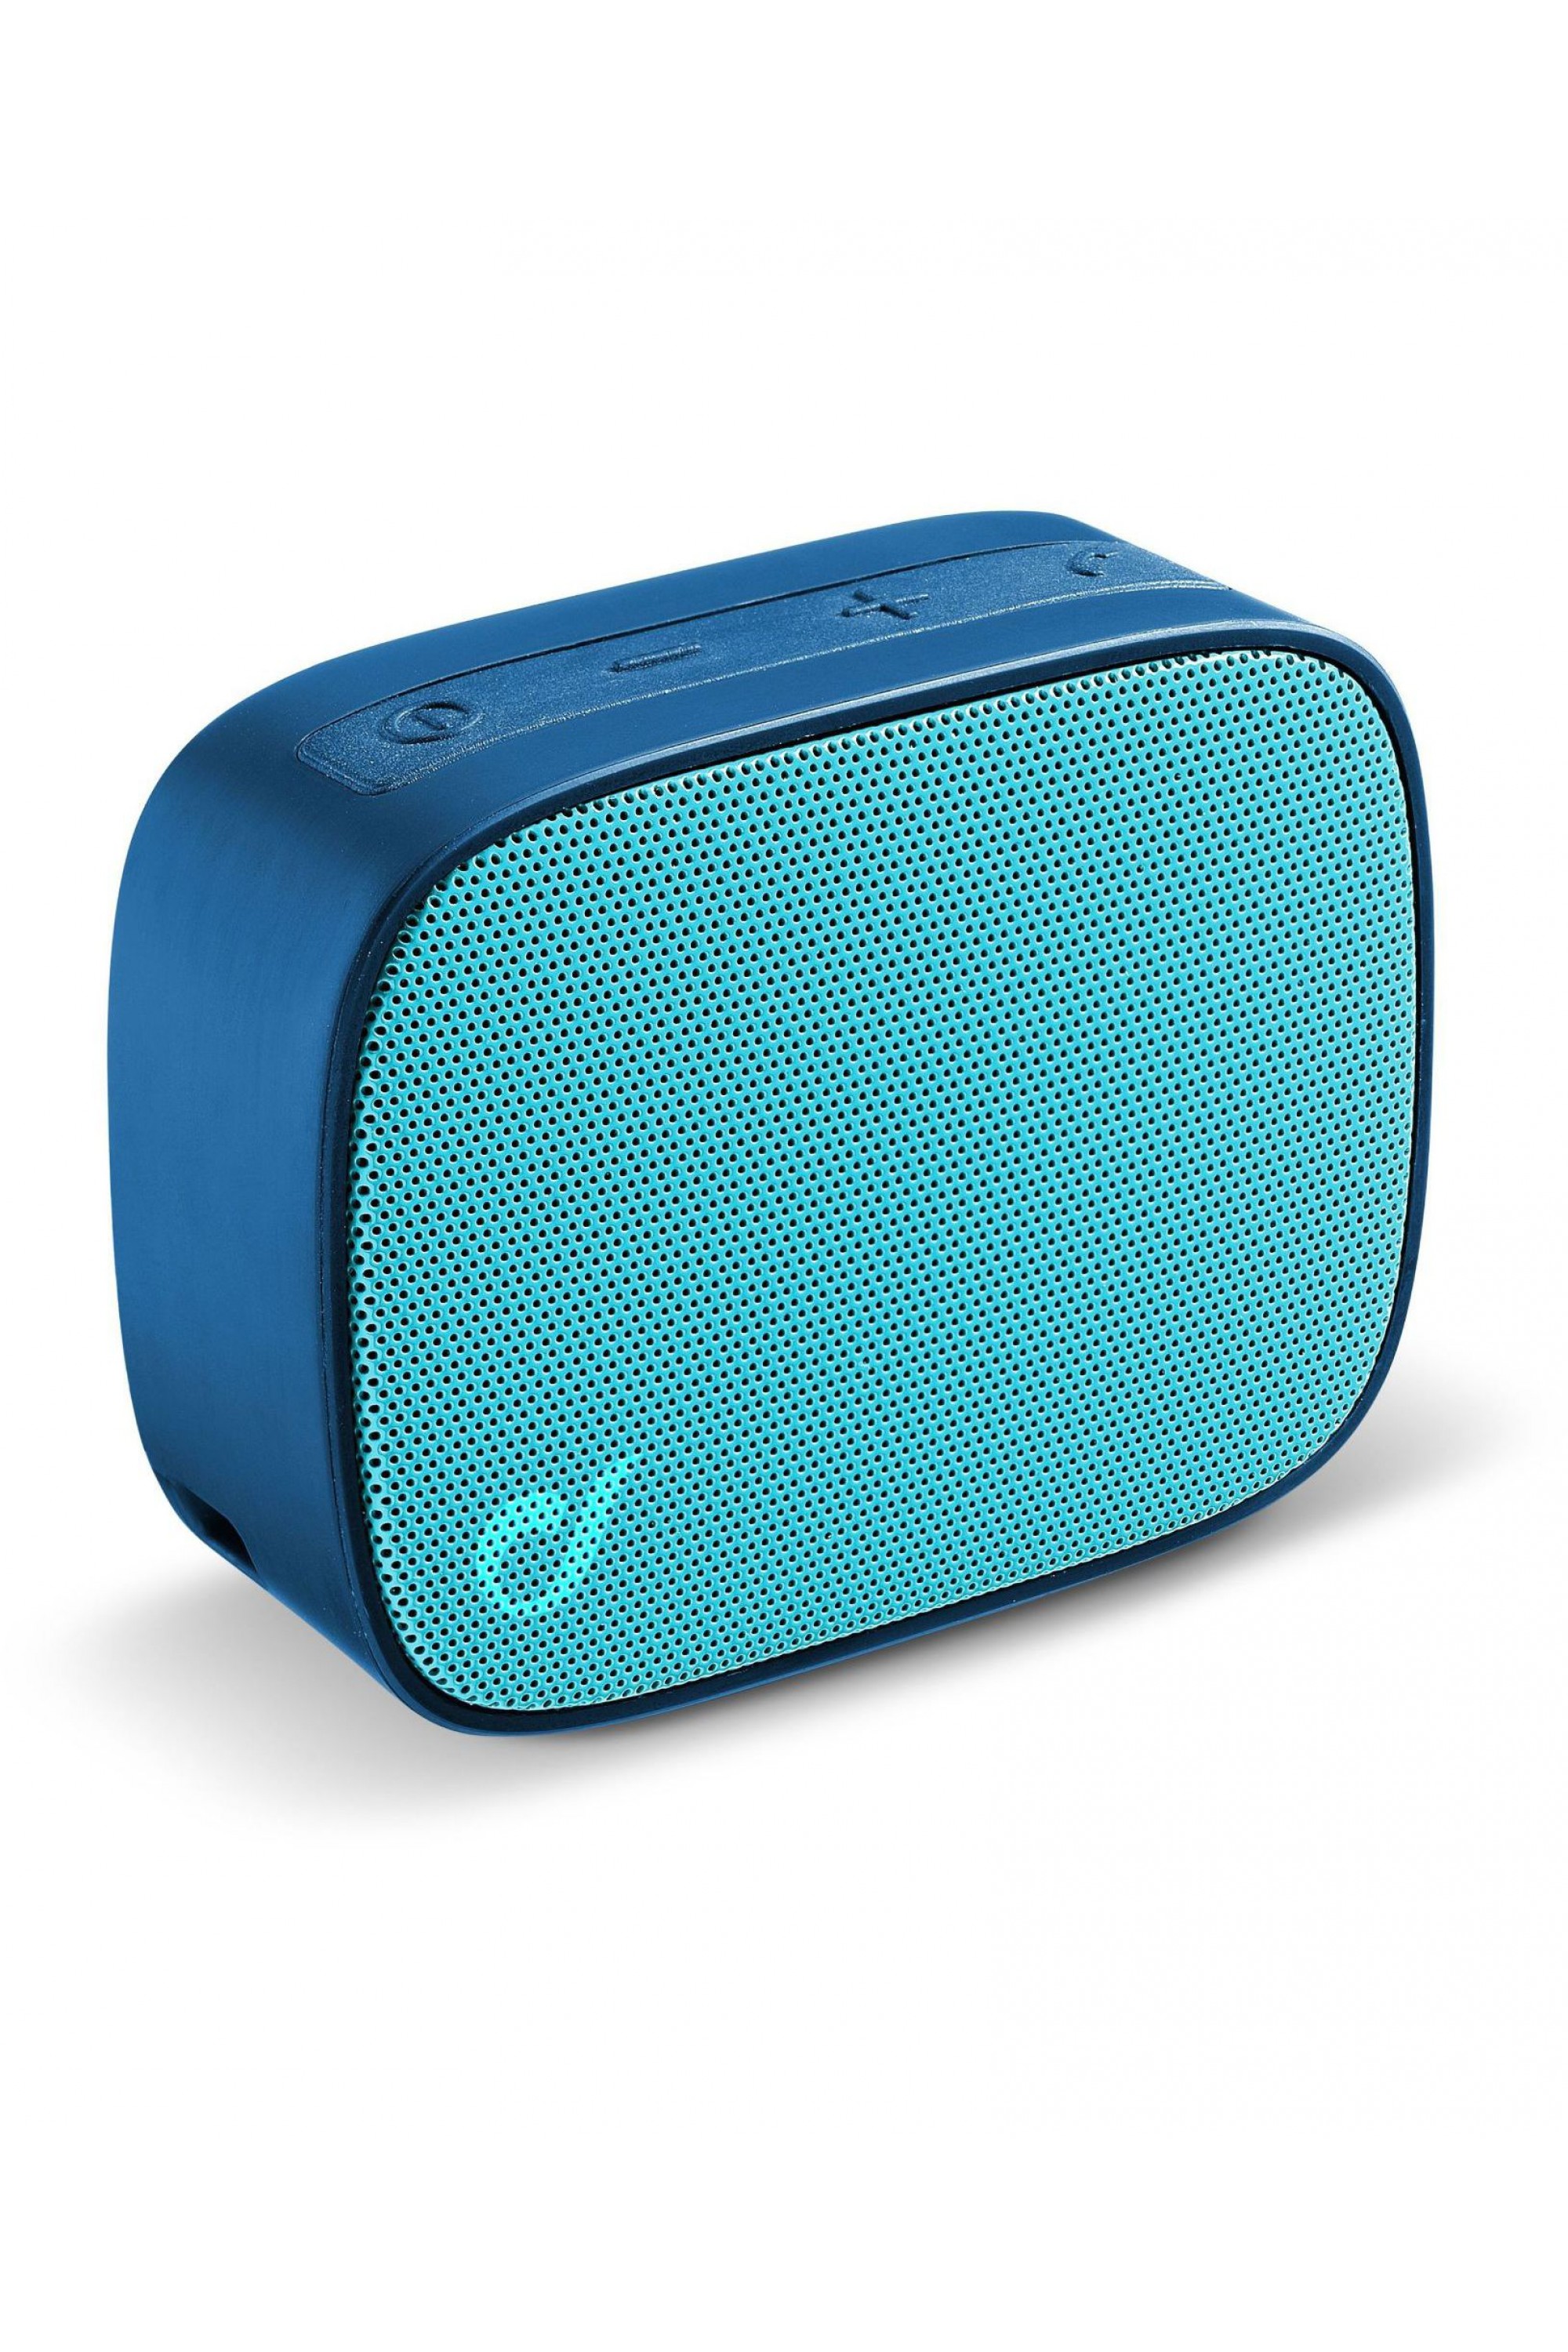 Cellularline Fizzy Turquoise Bluetooth | Speakers Portable